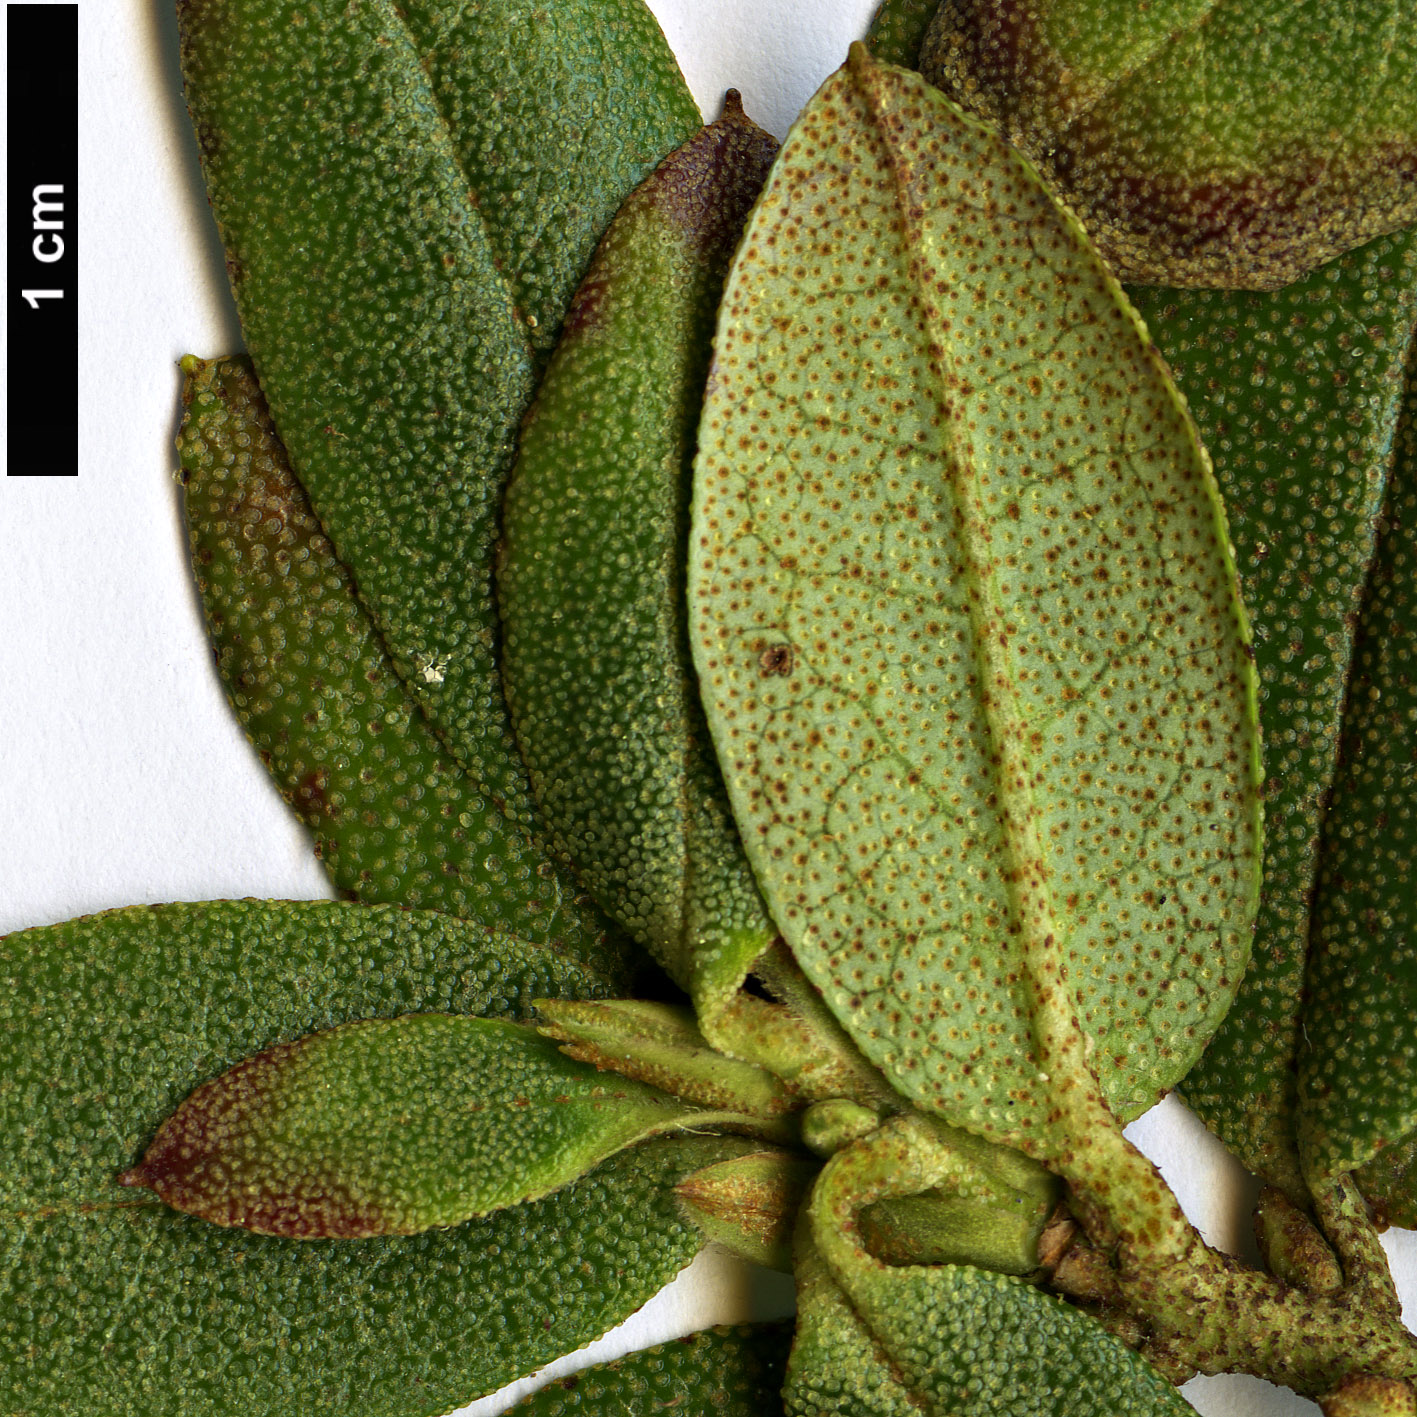 High resolution image: Family: Ericaceae - Genus: Rhododendron - Taxon: mianningense